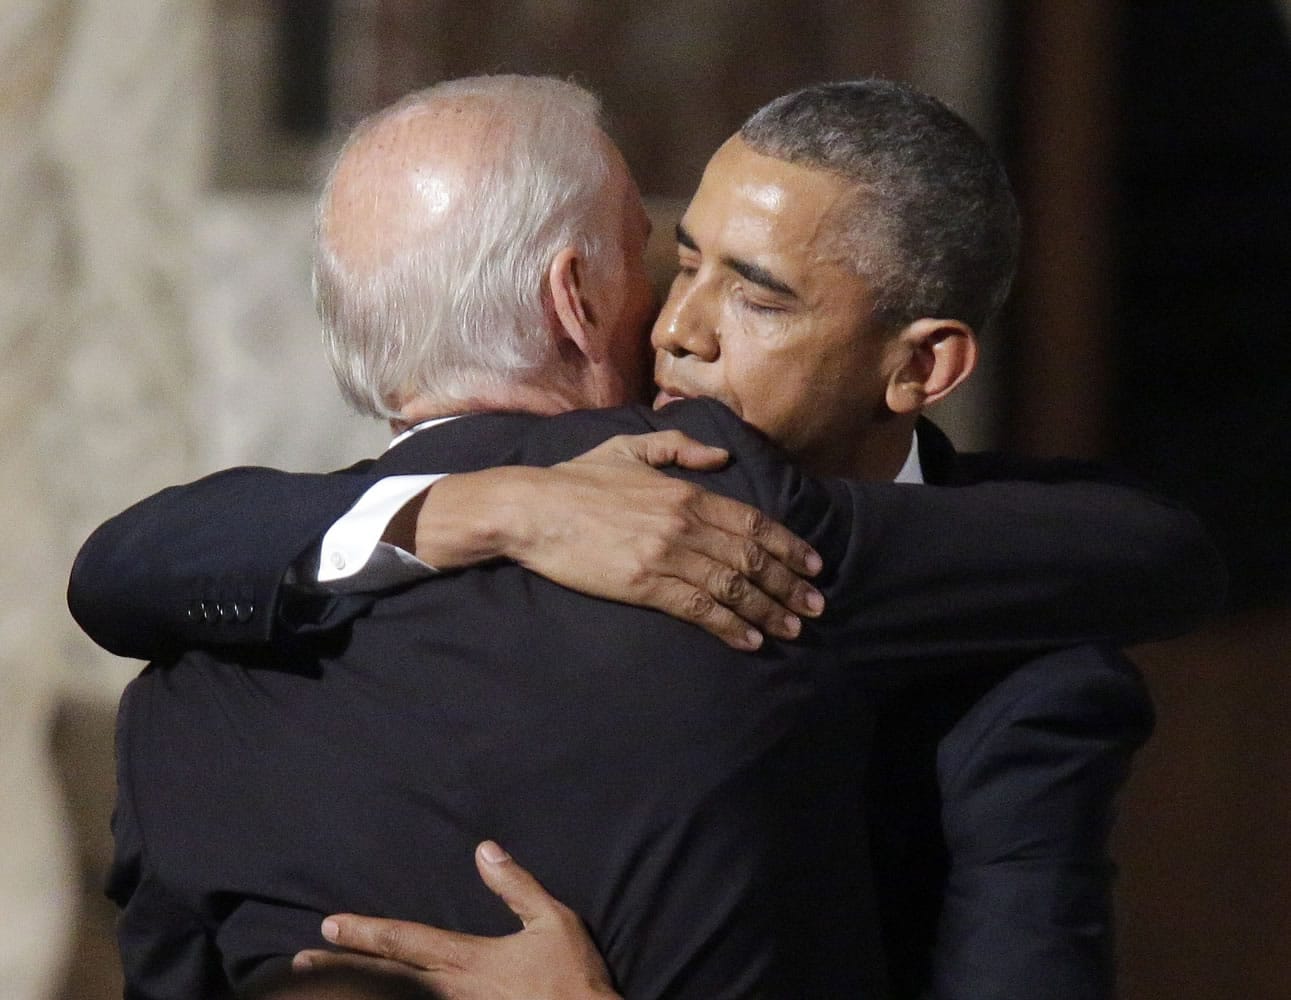 Vice President Joe Biden shares a hug with President Barack Obama after Obama eulogized Biden's son, Beau Biden, during his funeral Saturday at St. Anthony of Padua R.C. Church in Wilmington. Over 1,000 mourners were in attendance at St. Anthony of Padua Roman Catholic Church, including Attorney General Loretta Lynch; Sens.